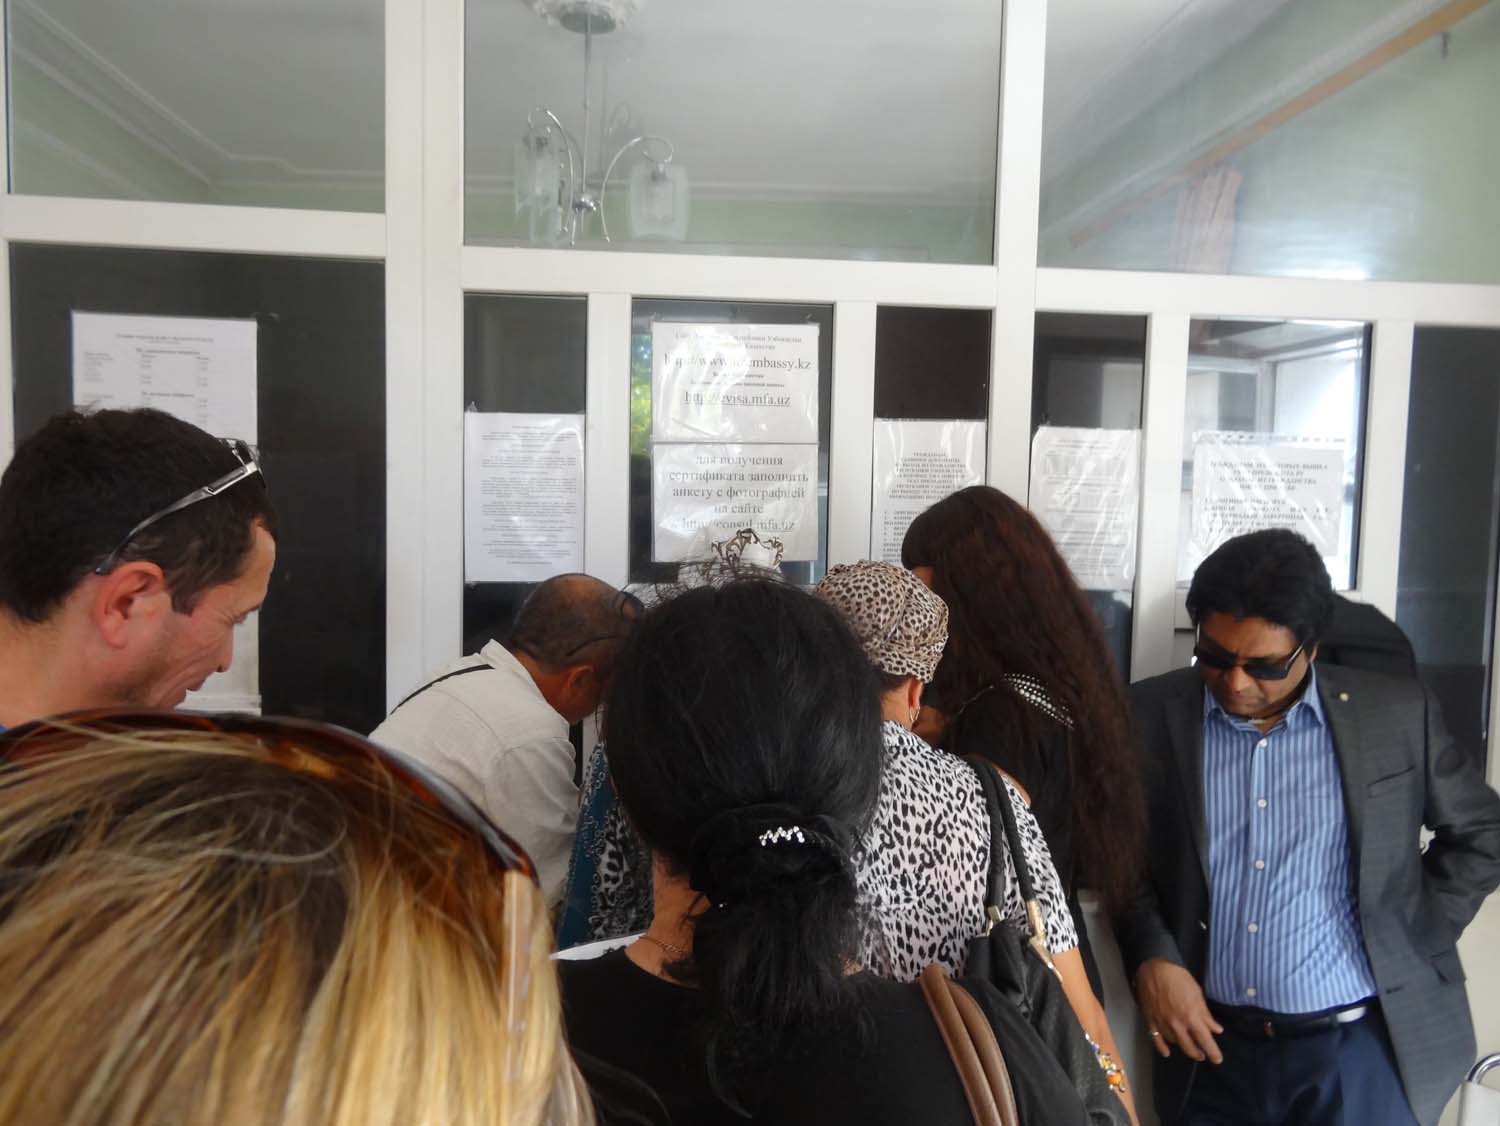 queuing in the Uzbek embassy (this is once you are finally inside)